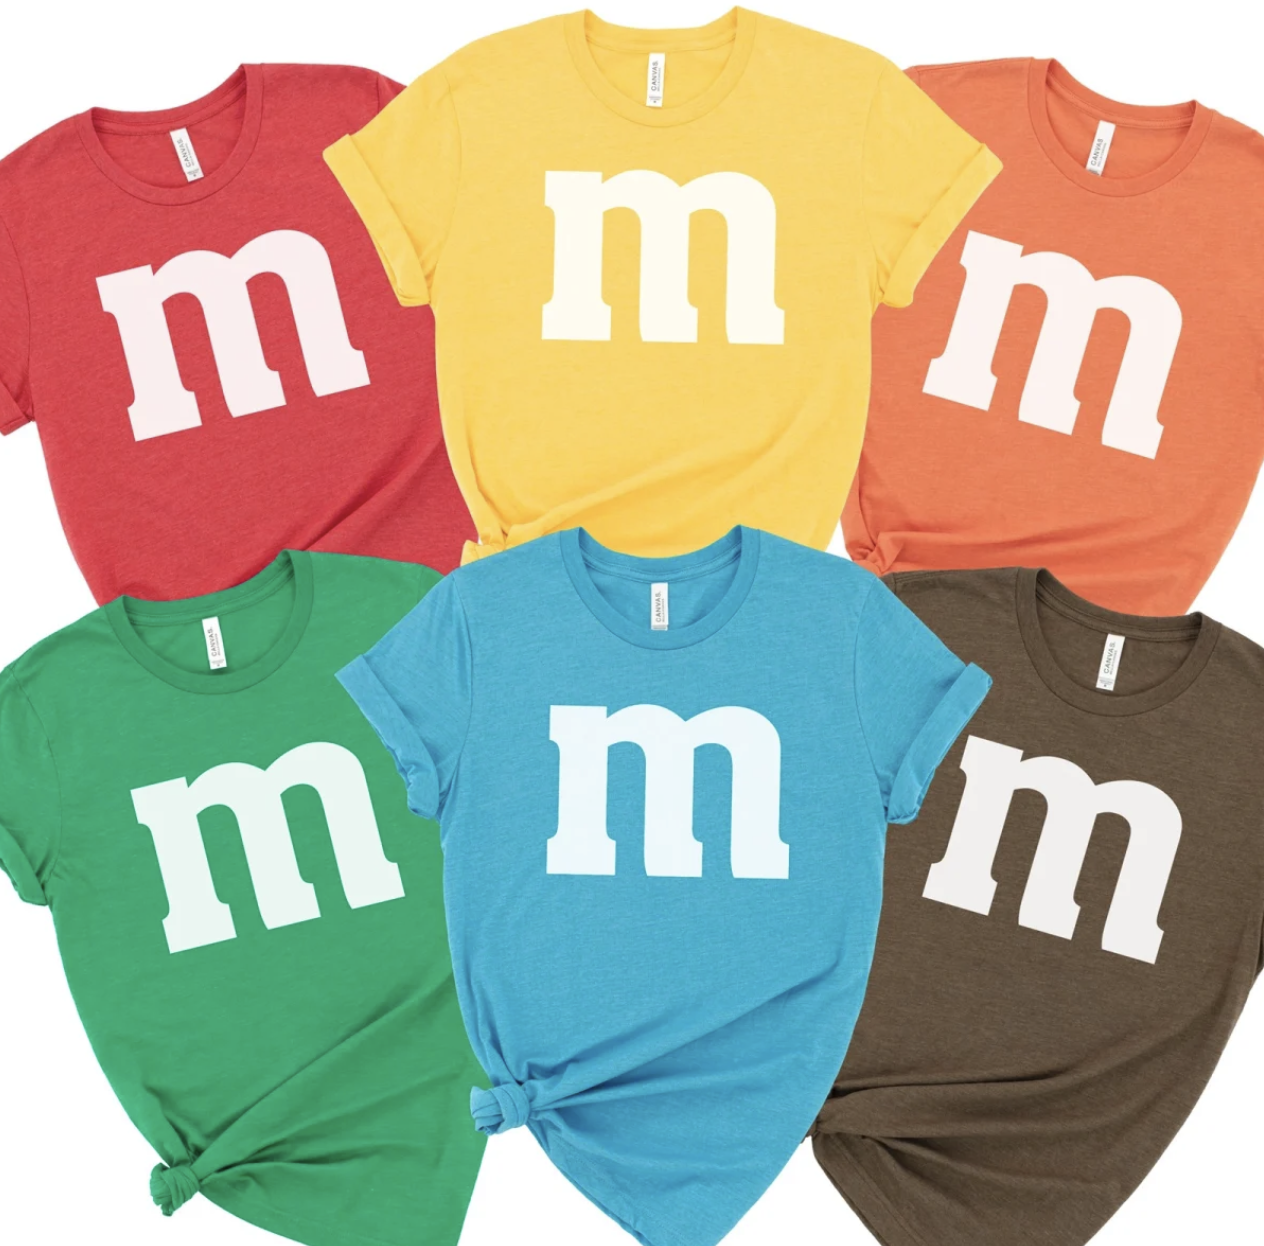 Deliciously Delicate Letter M Costume Tees solely $16.99 shipped!